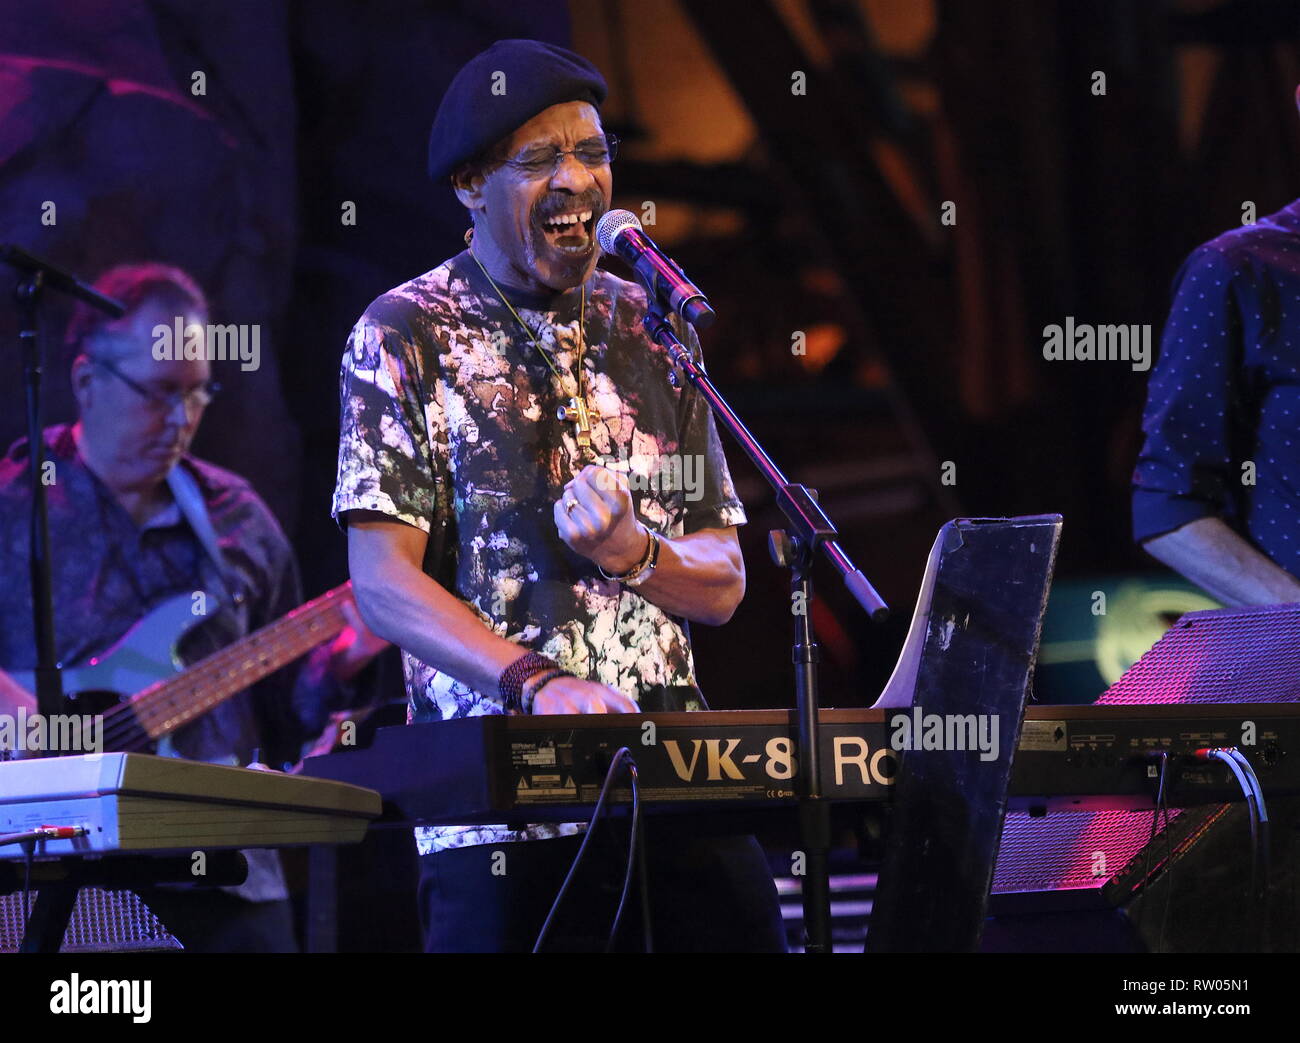 Musician Leroy 'Lonnie' Jordan is shown performing on star during a 'live' concert appearance with War. Stock Photo